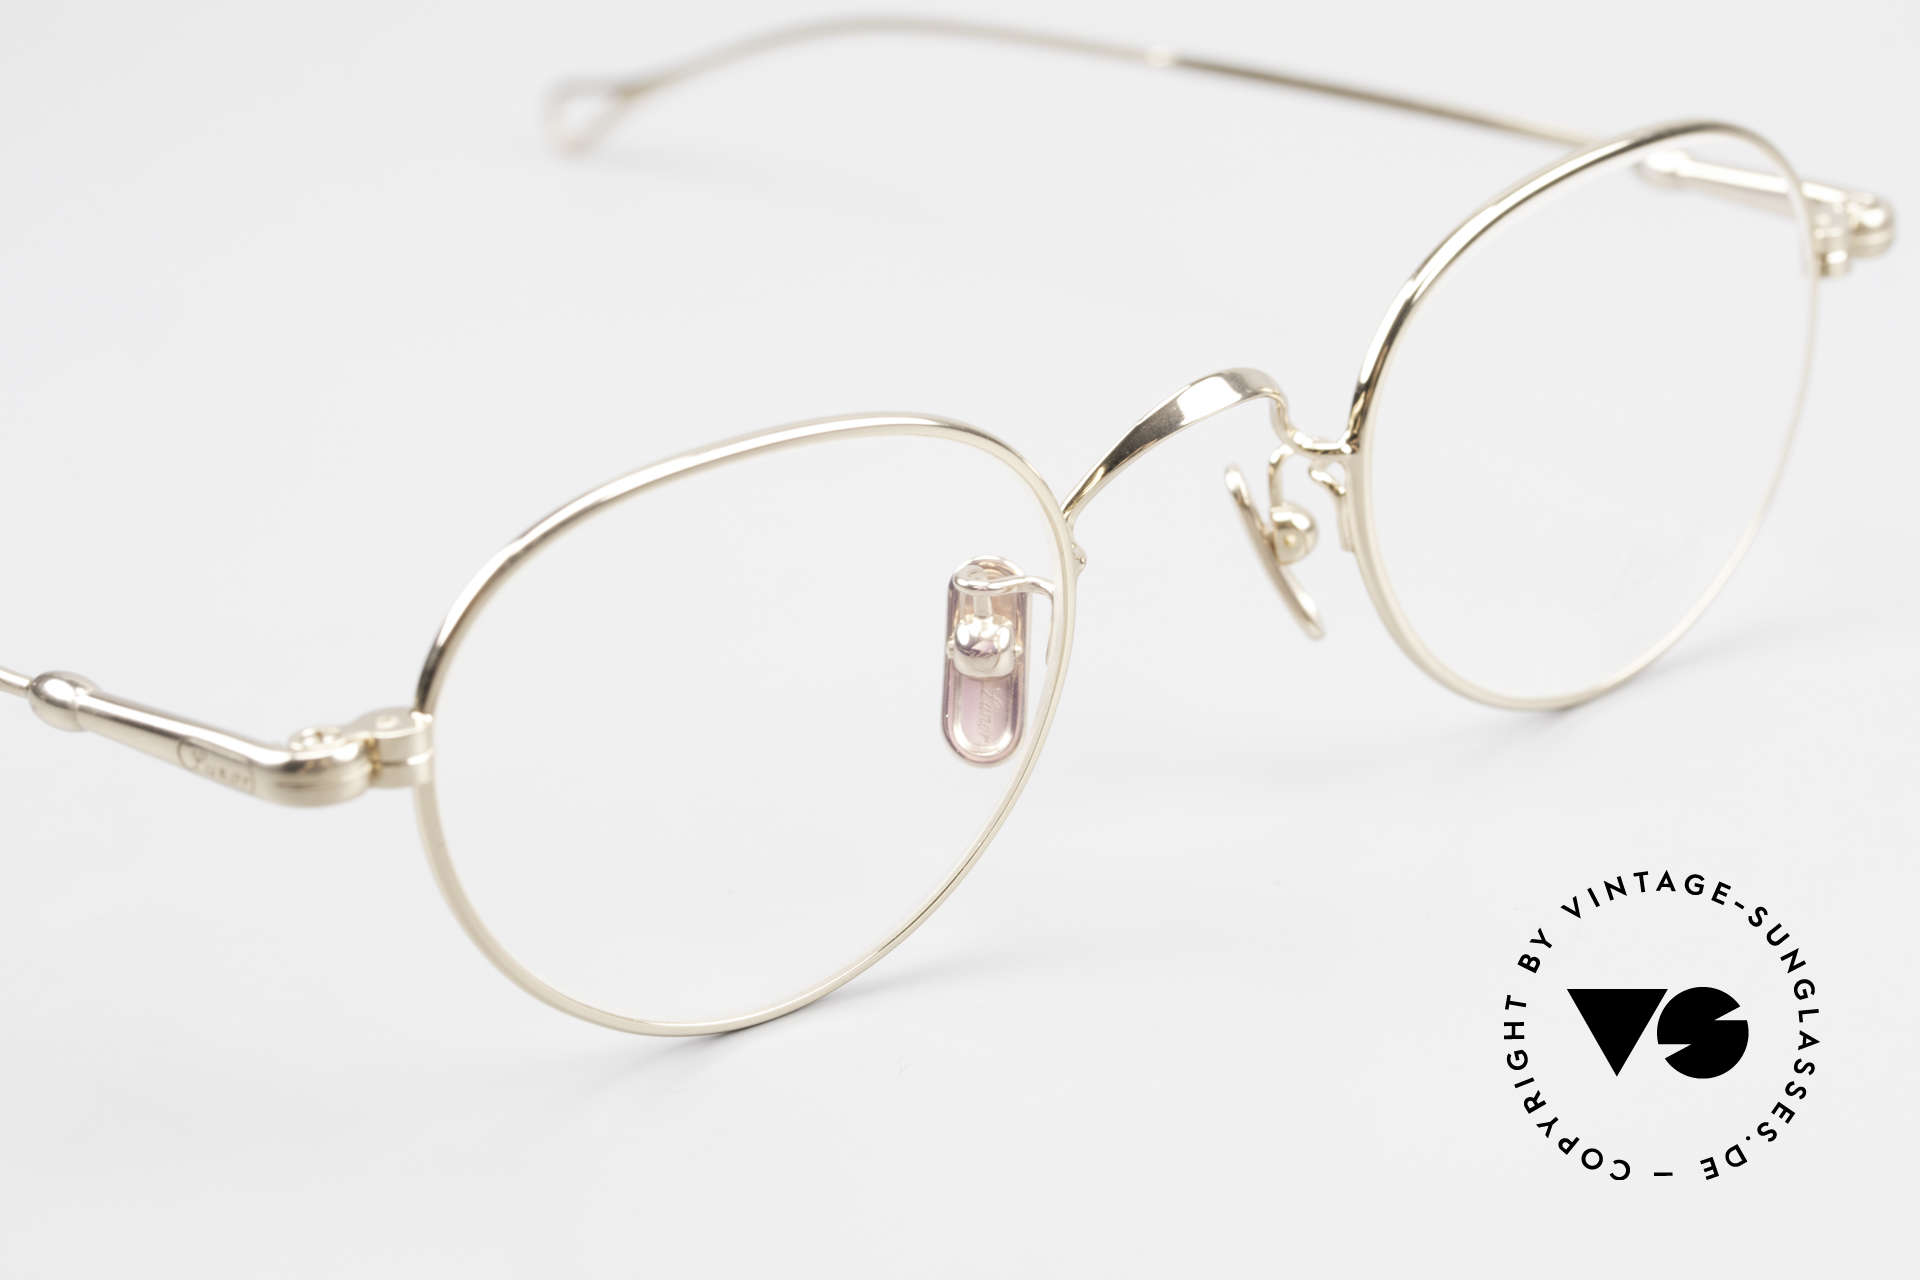 Lunor V 107 Panto Eyeglasses Gold Plated, thus, we decided to take it into our vintage collection, Made for Men